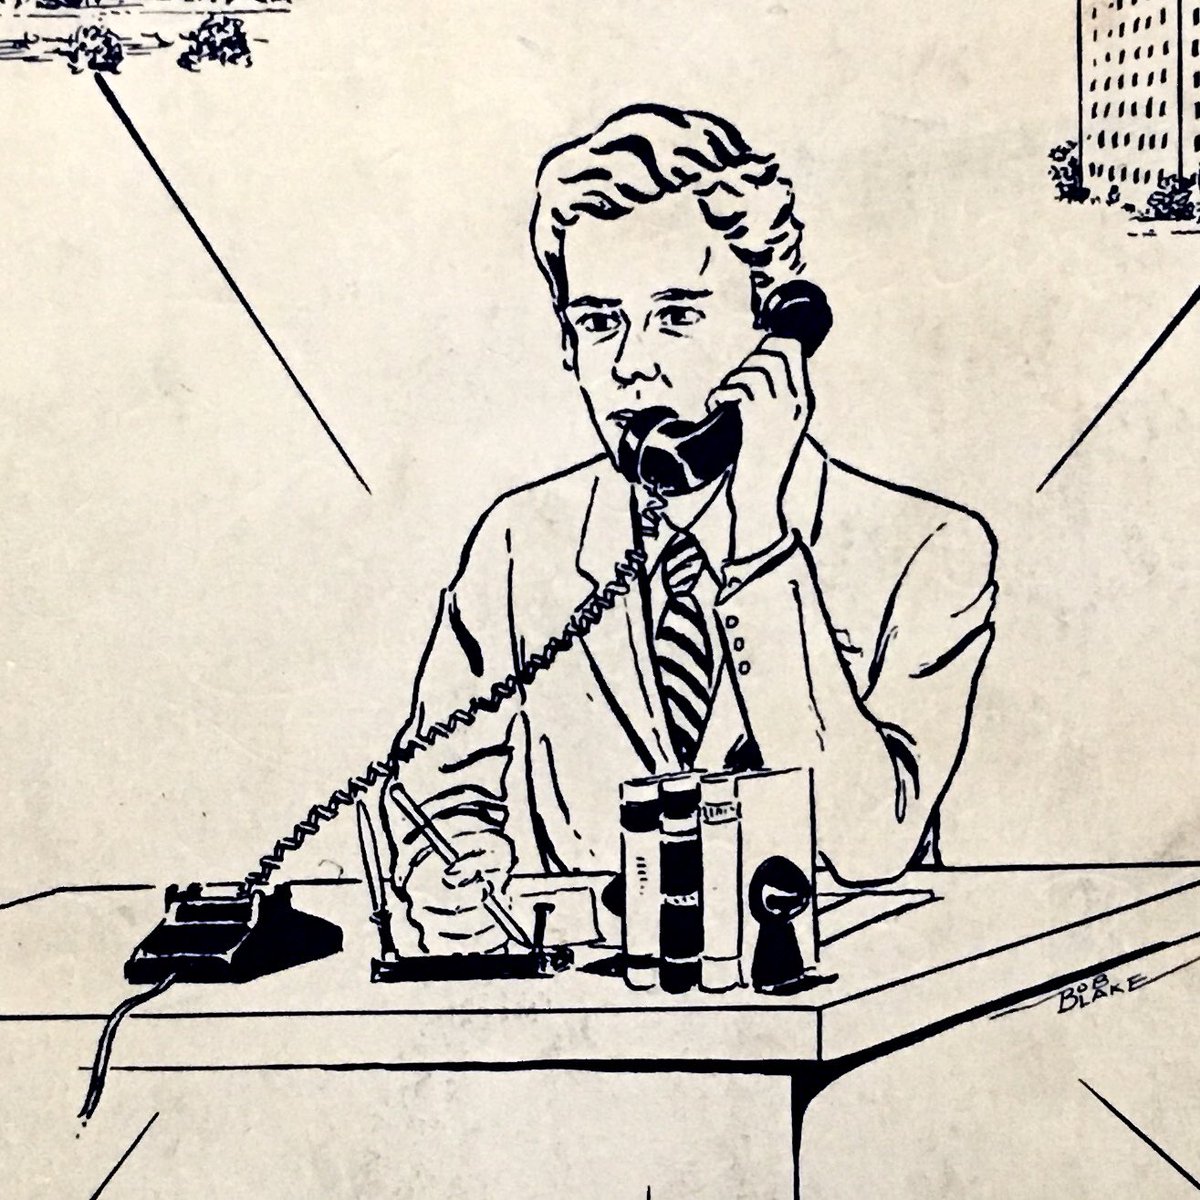 This preposterous drawing gives me joy. Look at the tiny phone! The hand!